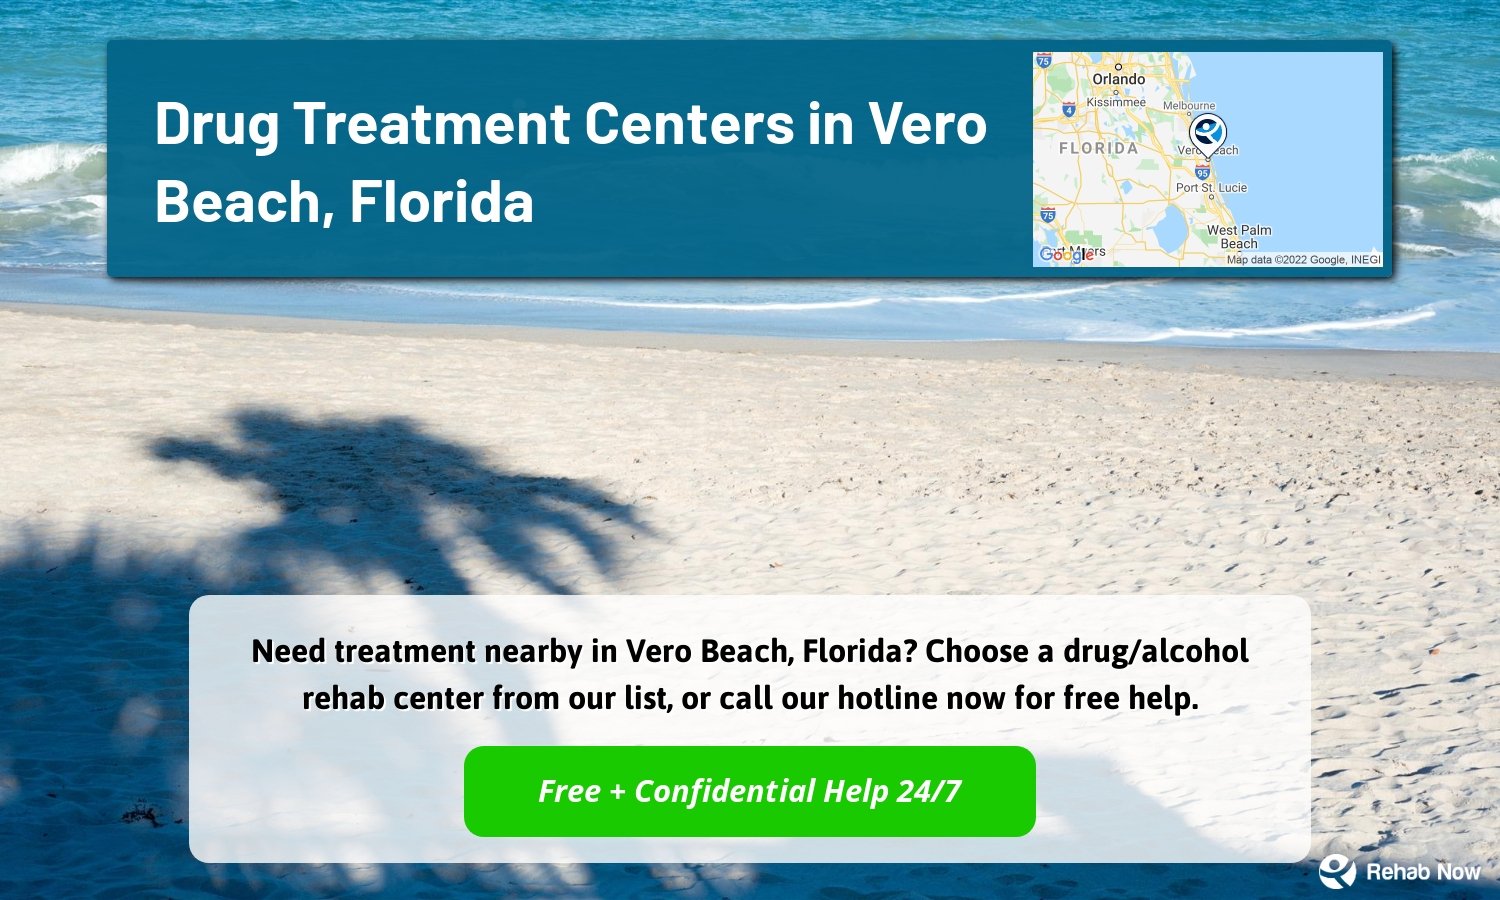 Need treatment nearby in Vero Beach, Florida? Choose a drug/alcohol rehab center from our list, or call our hotline now for free help.